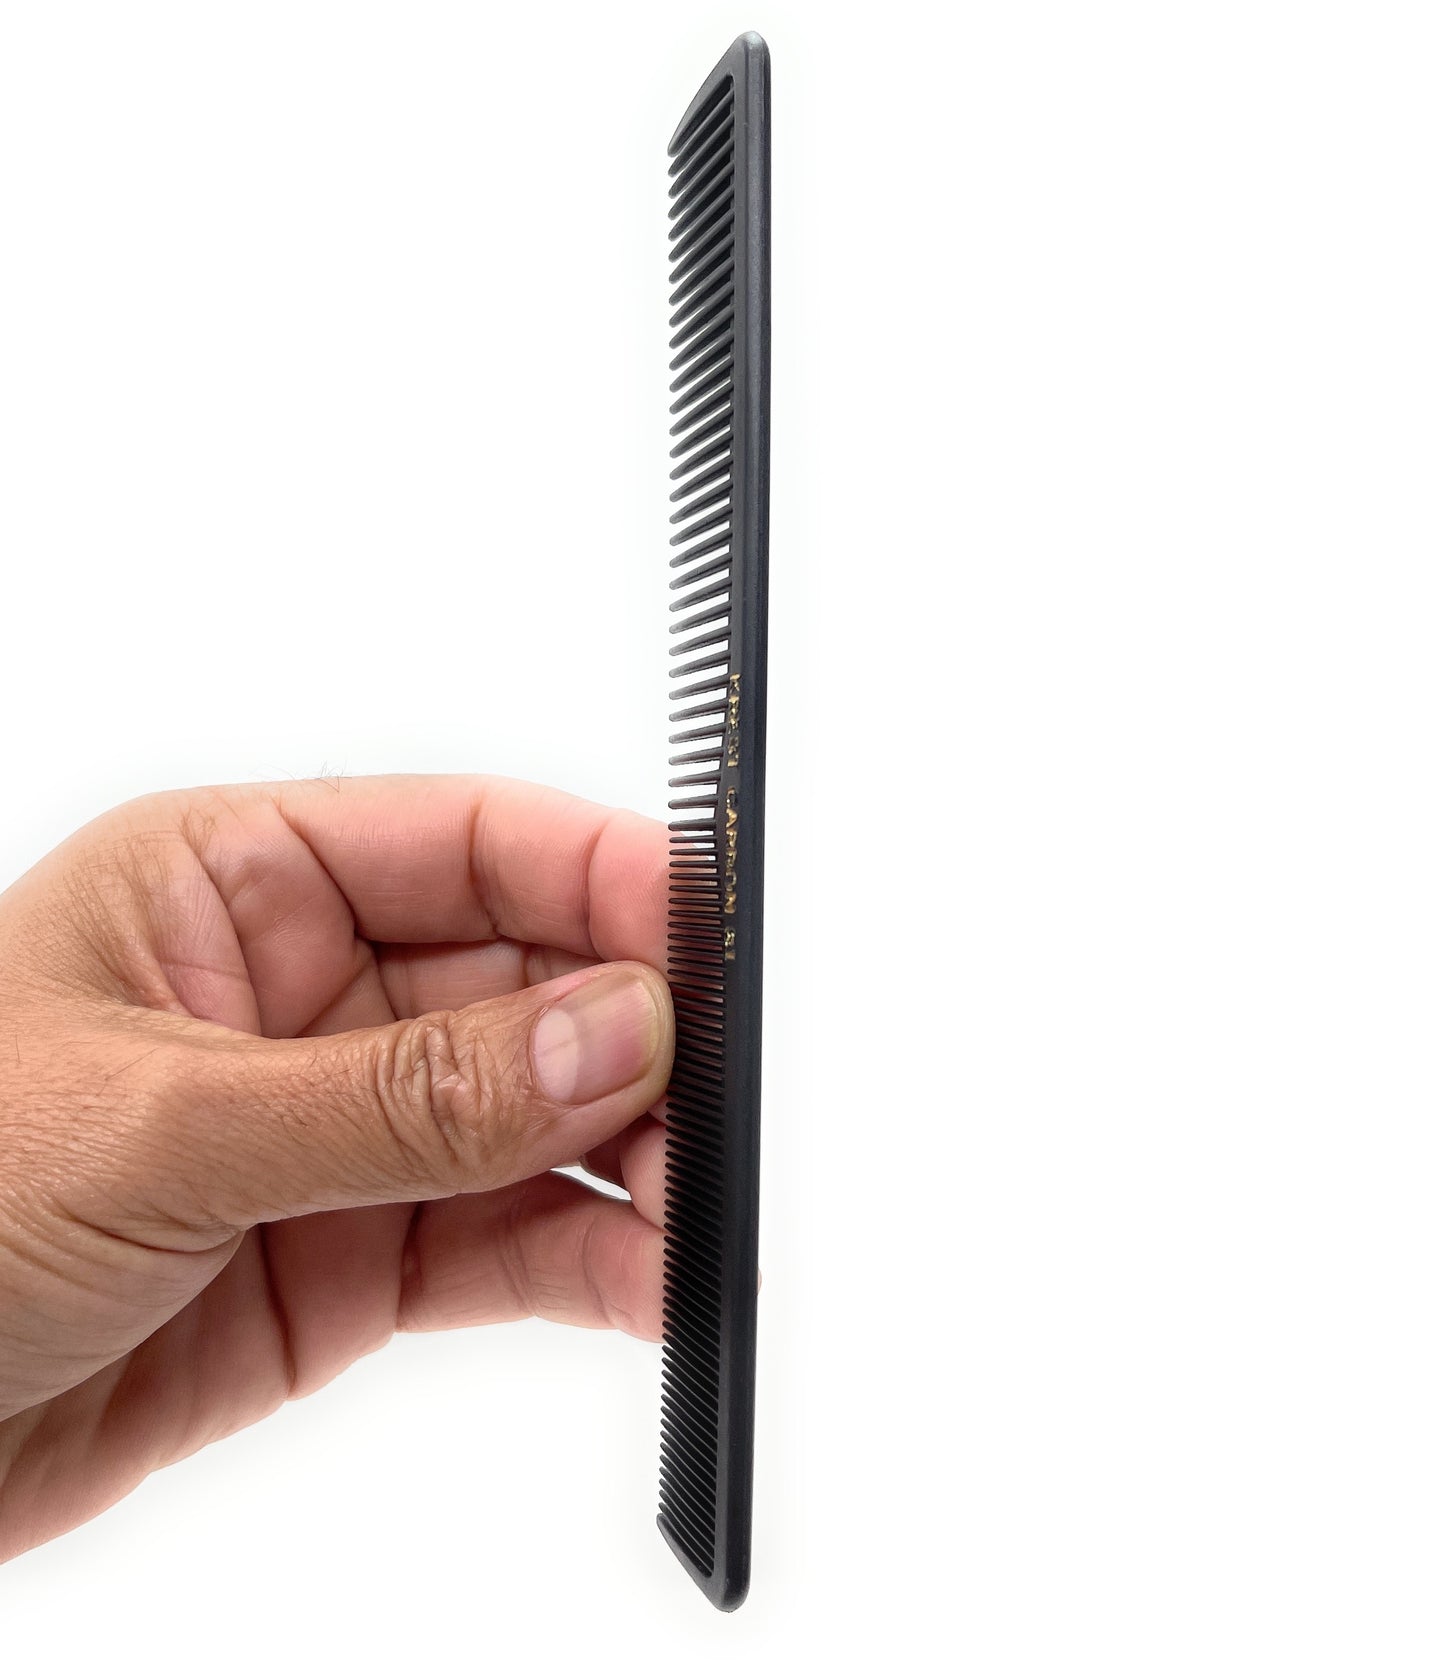 Krest Carbon Fiber Heat Thermal Combs All Purpose Barber Cutting Parting Rattail Flexible Thing Sectioning Fine And Wide Tooth 1 Pc.